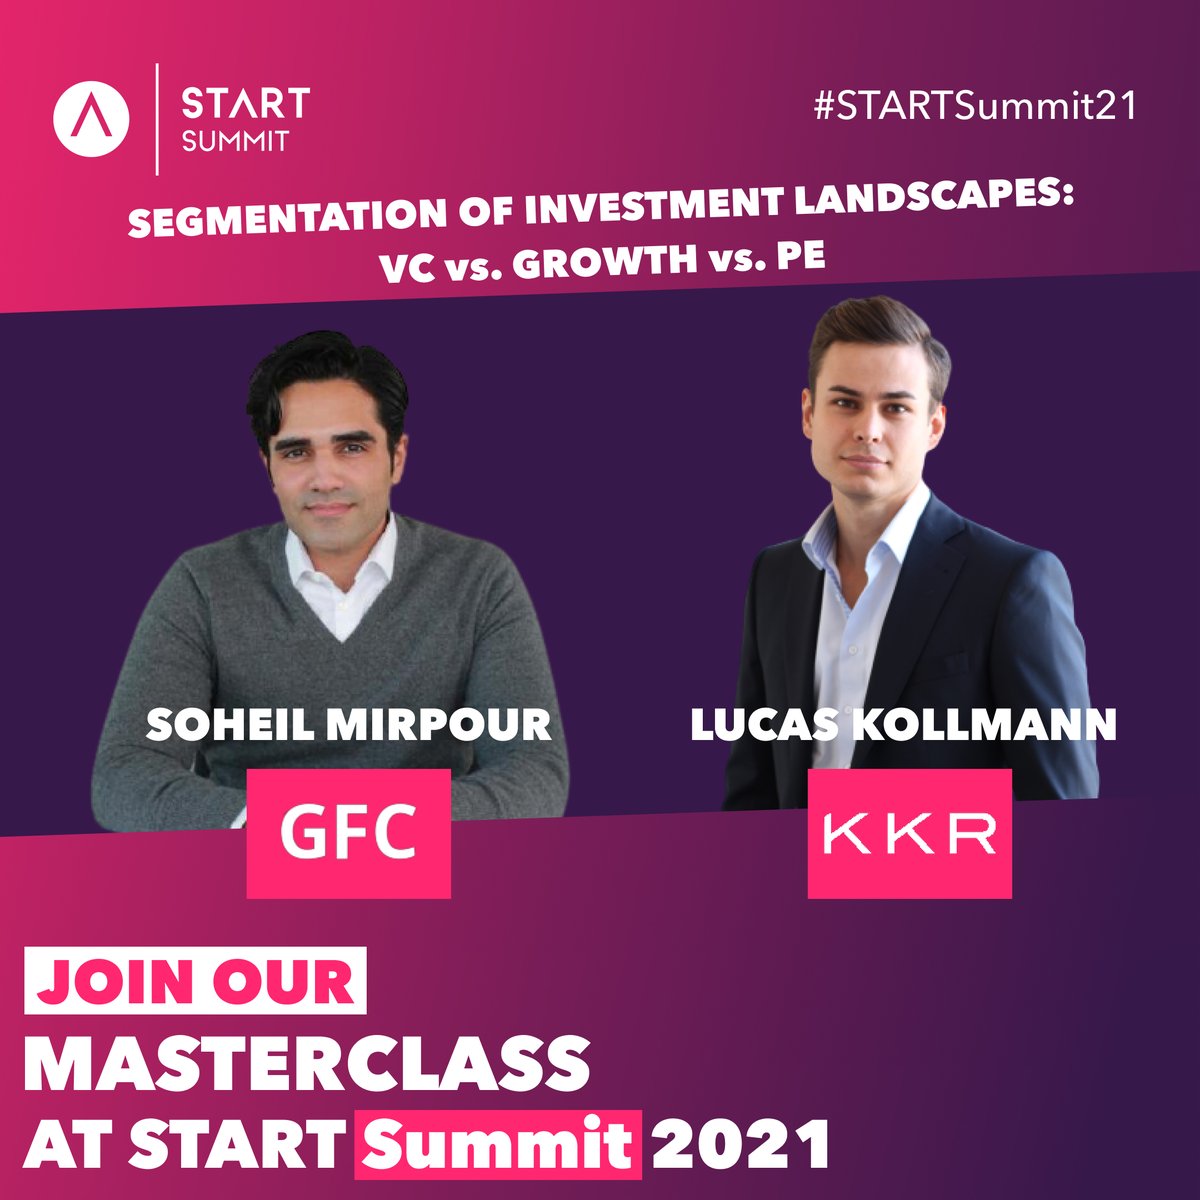 We are proud to announce Global Founders Capital and KKR as Masterclass presenters at START Summit 2021.